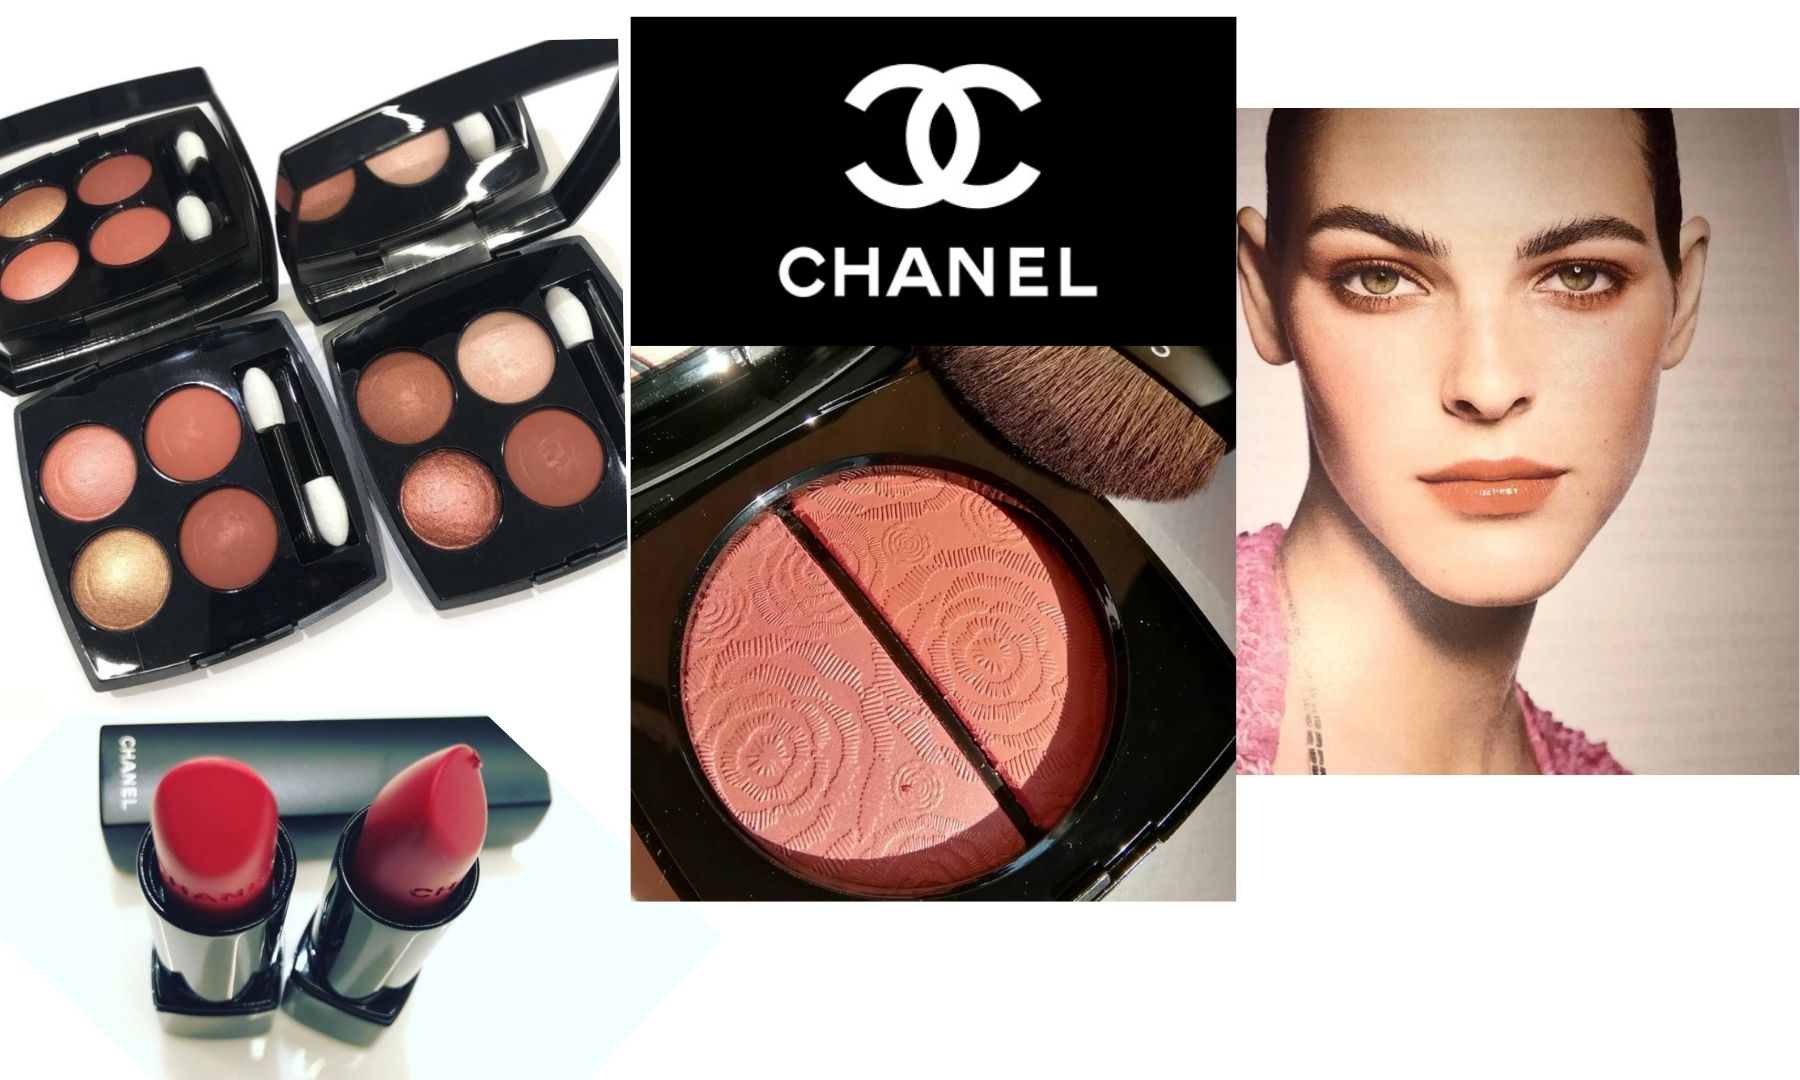 Chanel Spring 2021 Makeup Collection preview - Angela van Rose